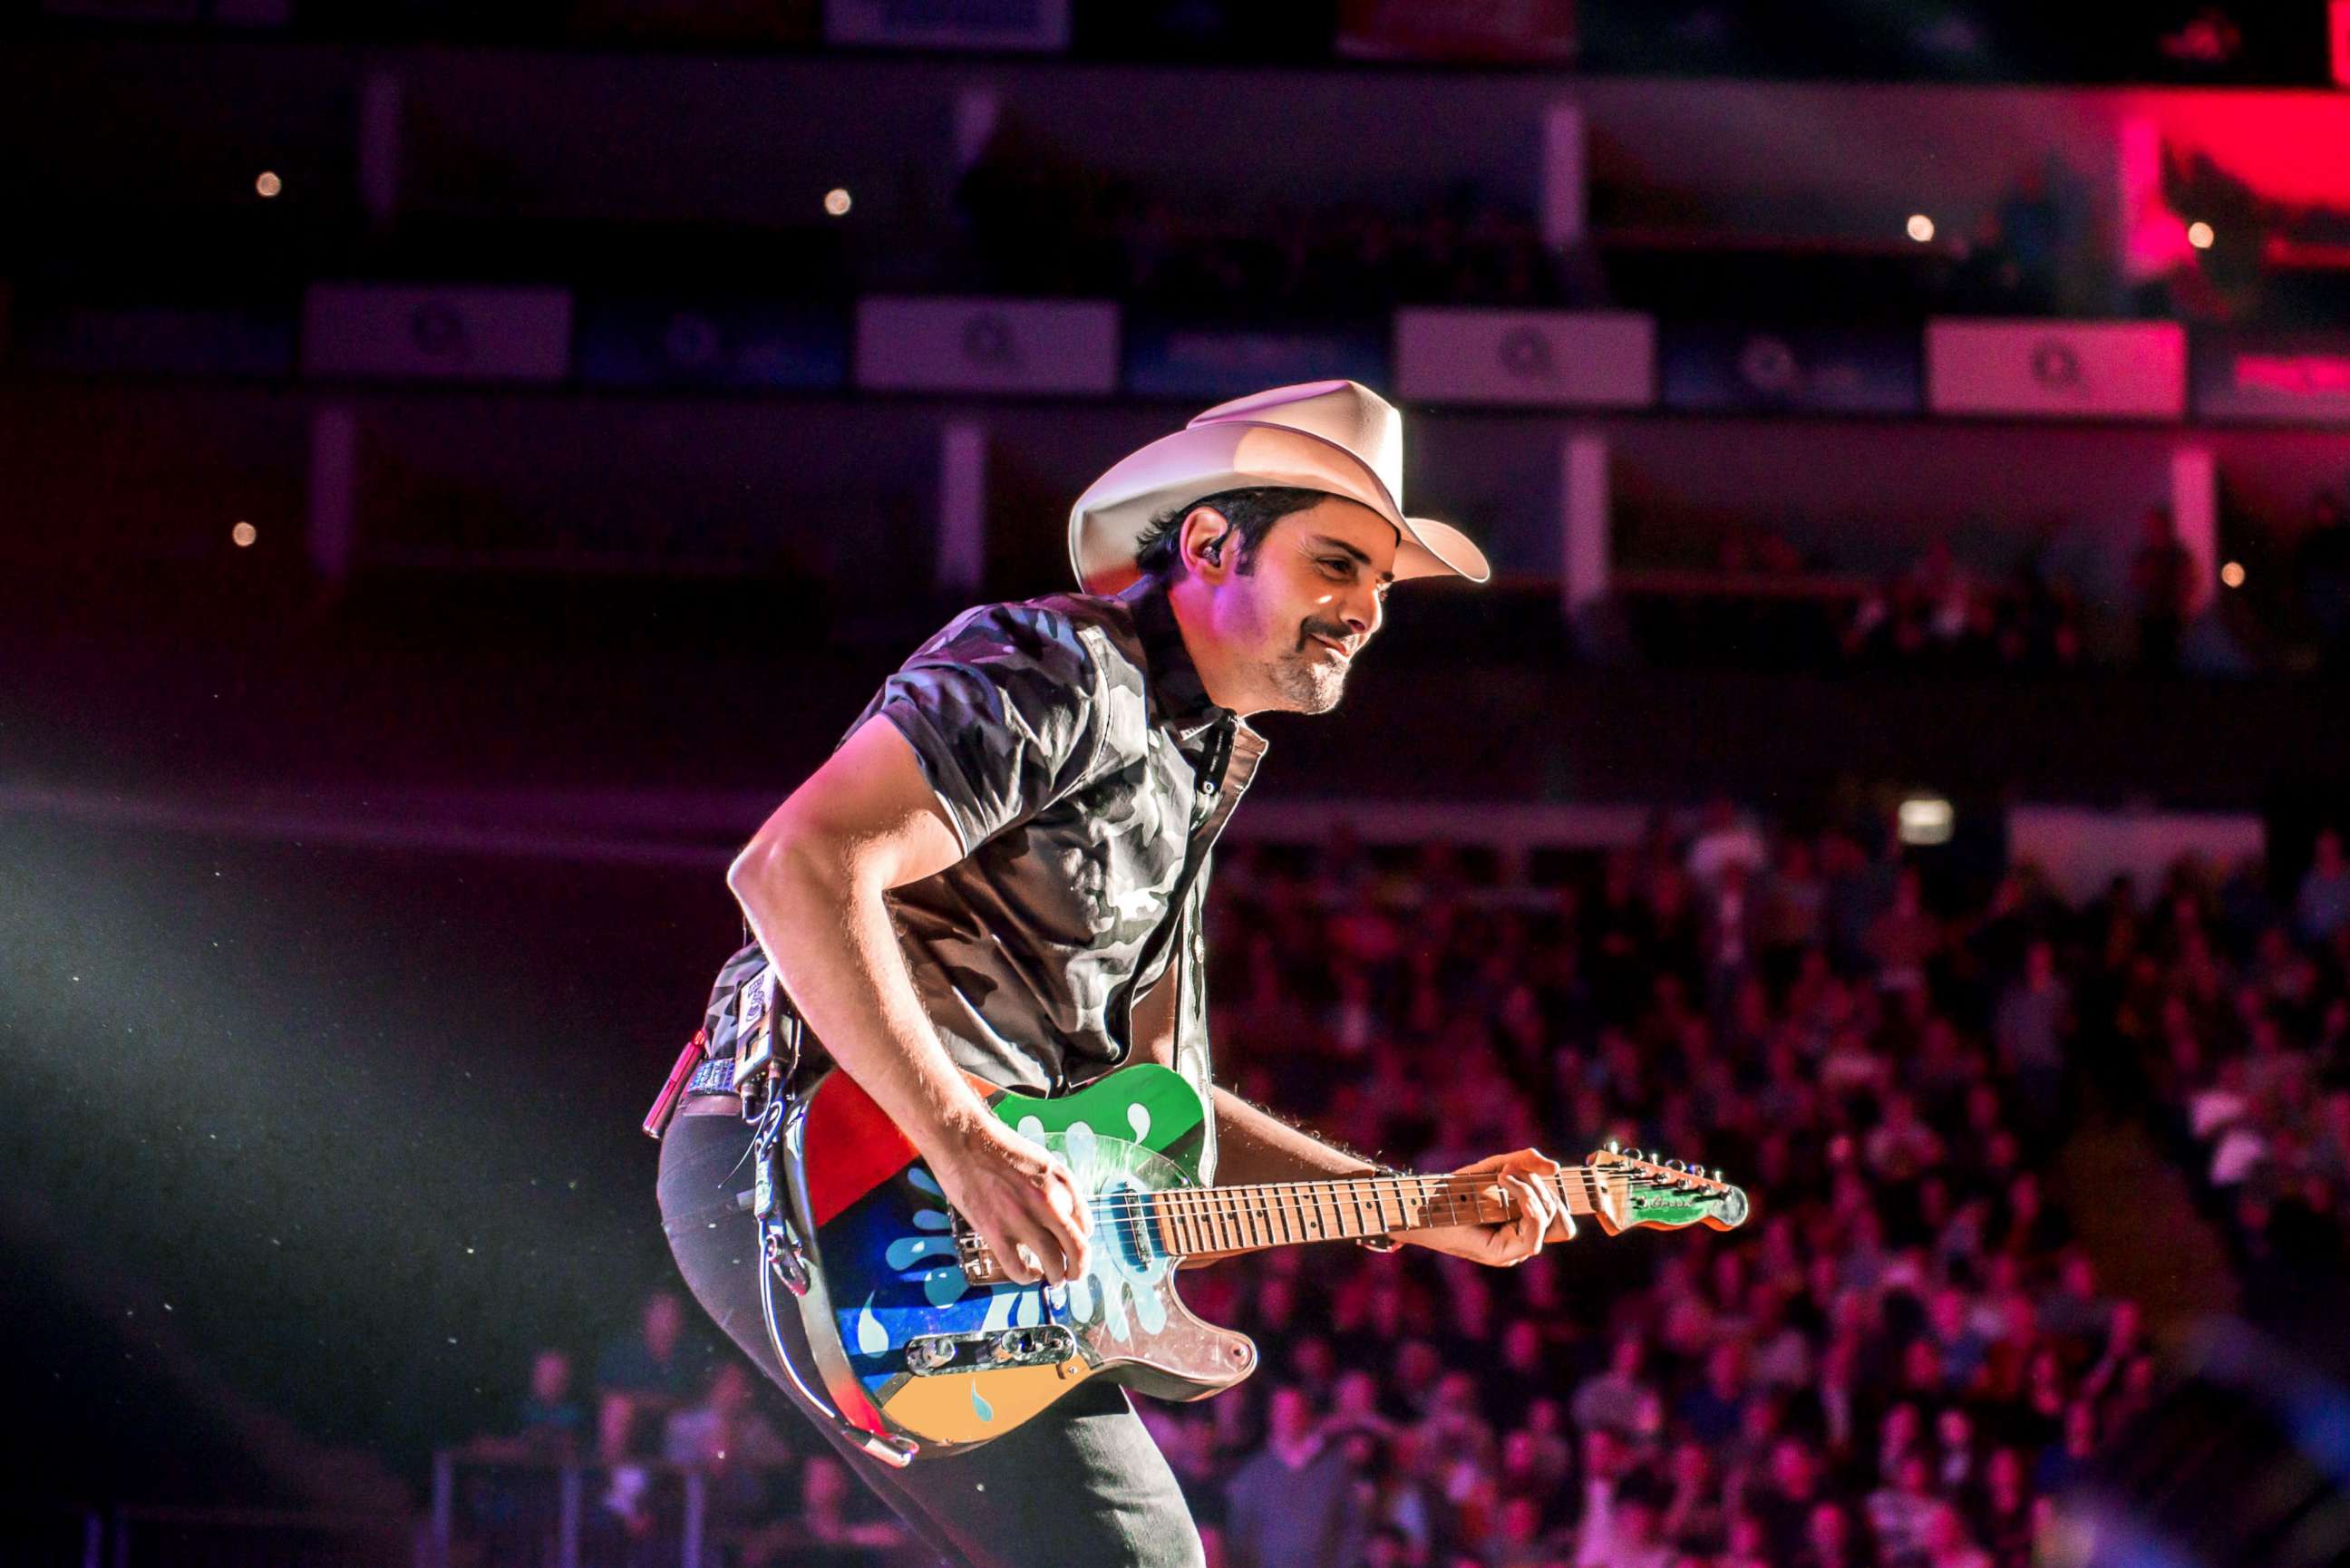 PHOTO: Brad Paisley performs on stage in London Oct. 12, 2019.